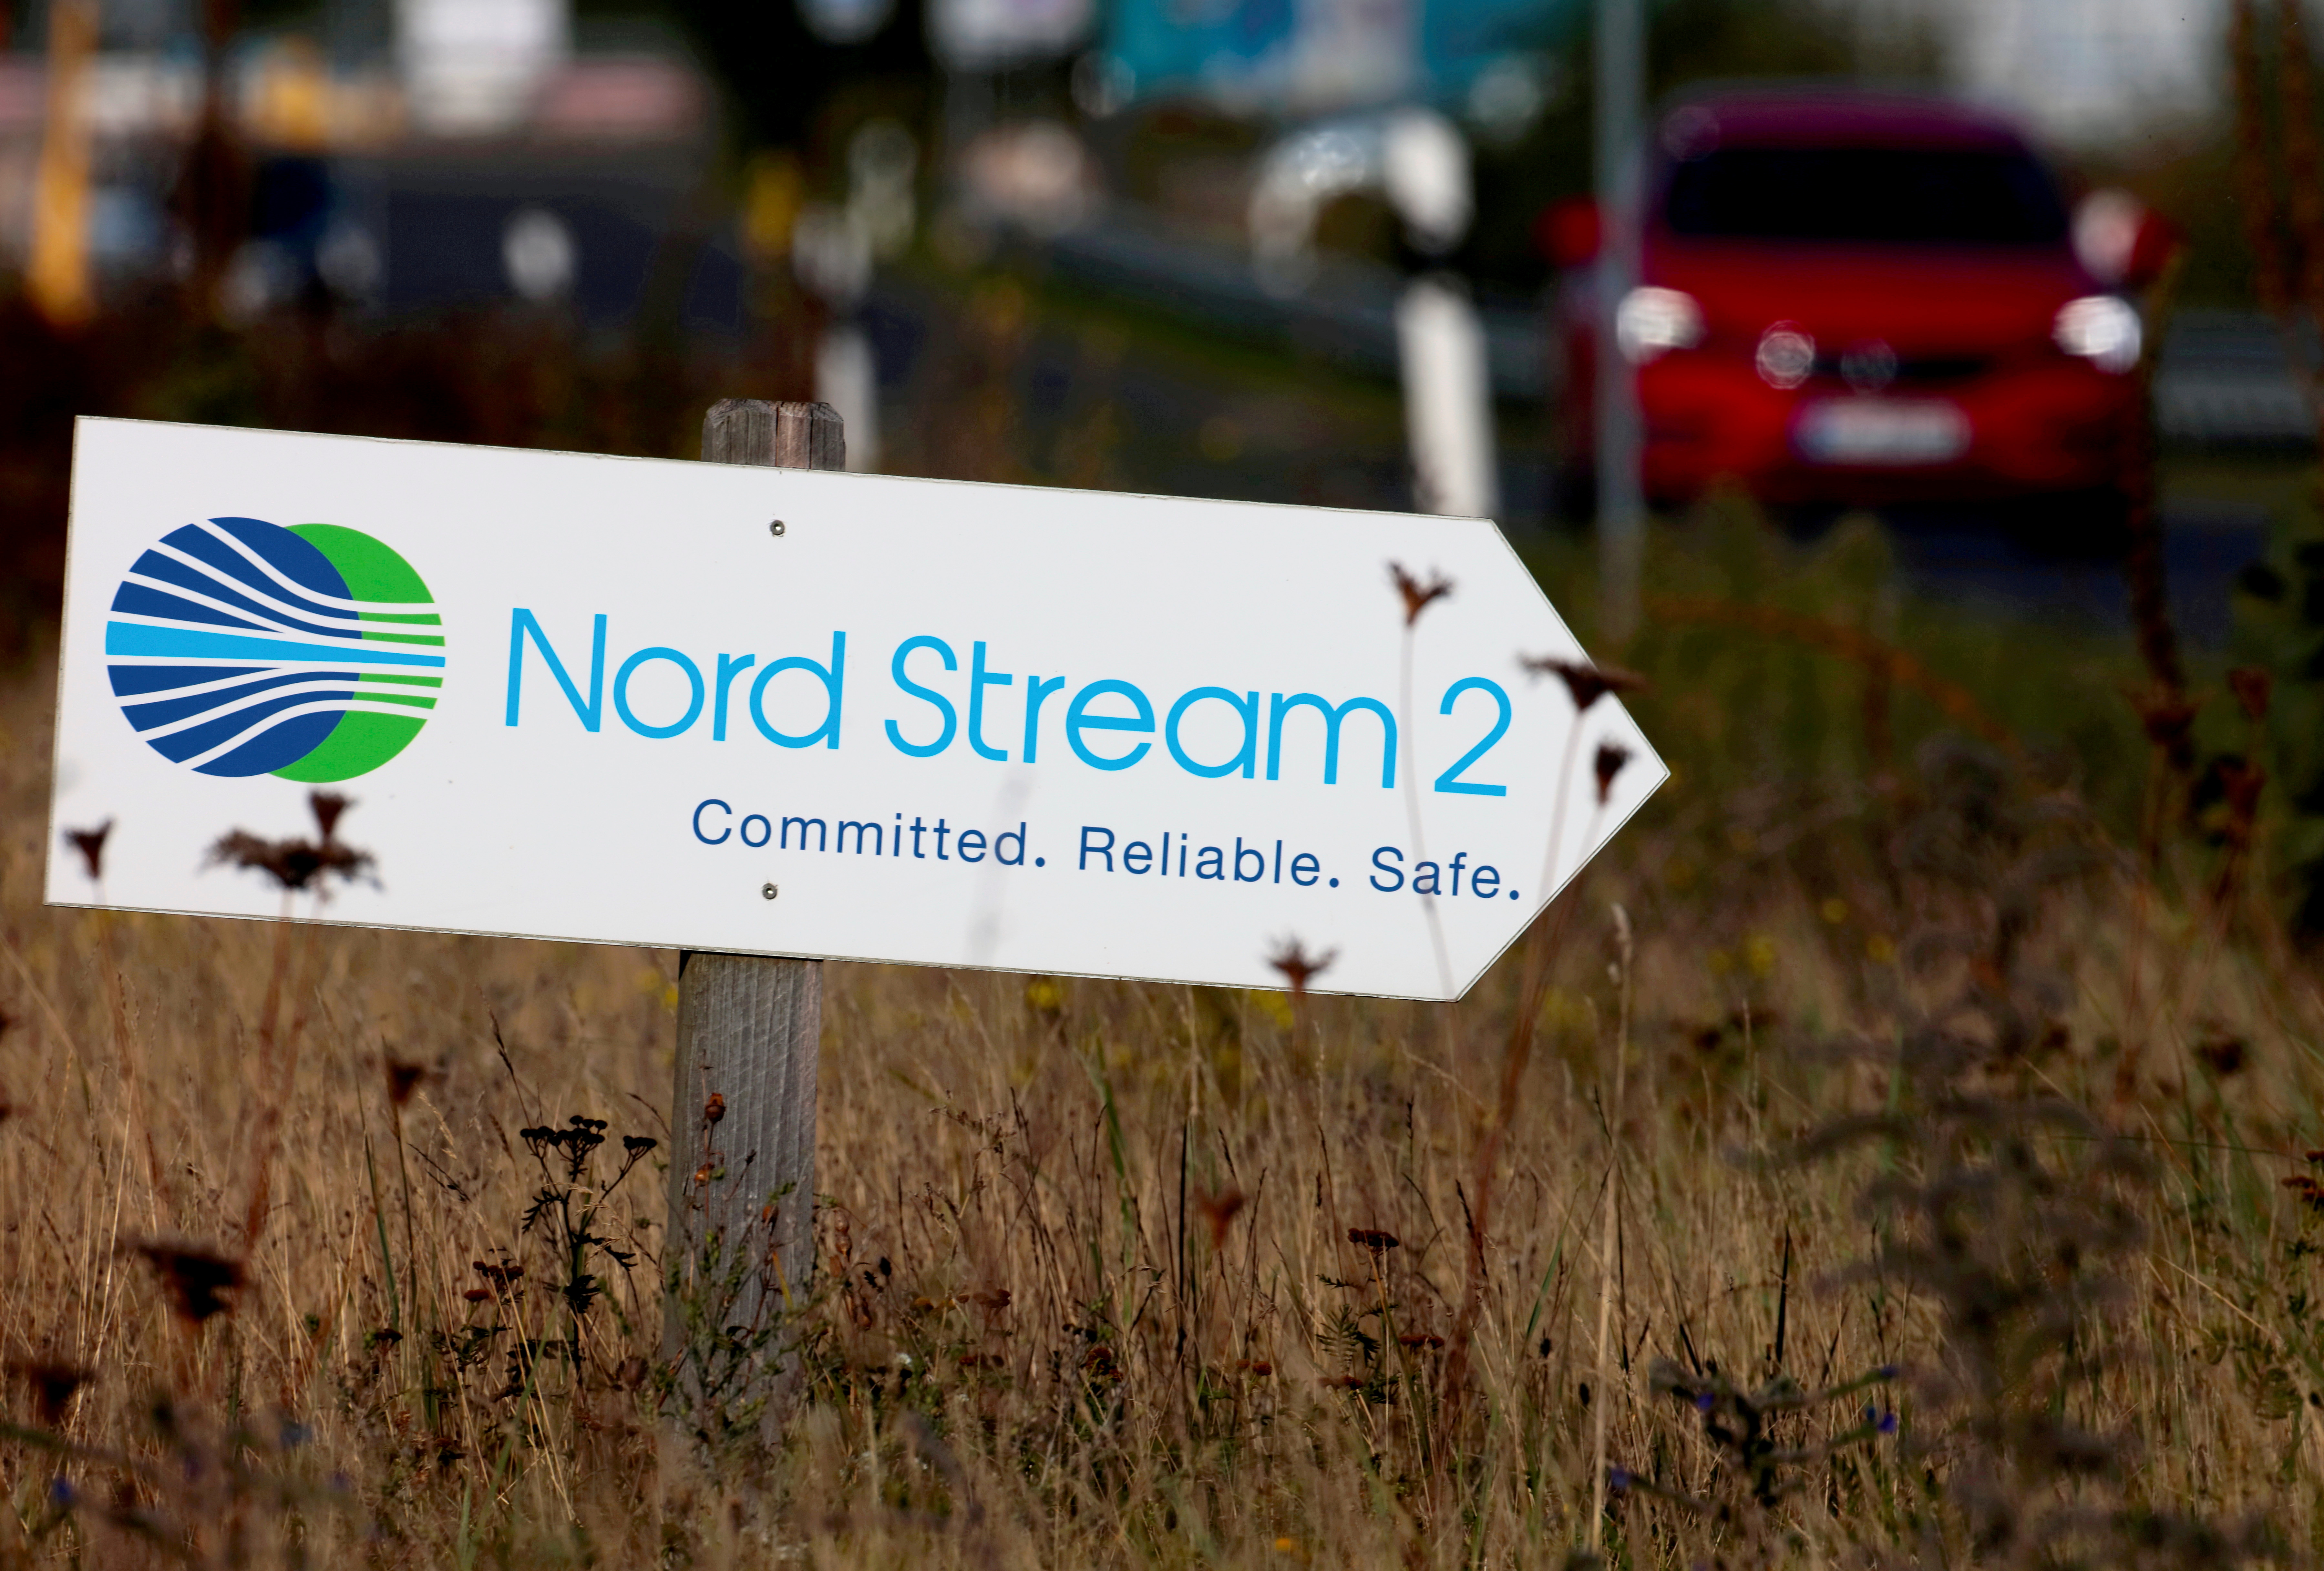 A road sign directs traffic towards the Nord Stream 2 gas line landfall facility entrance in Lubmin, Germany, September 10, 2020.   REUTERS/Hannibal Hanschke